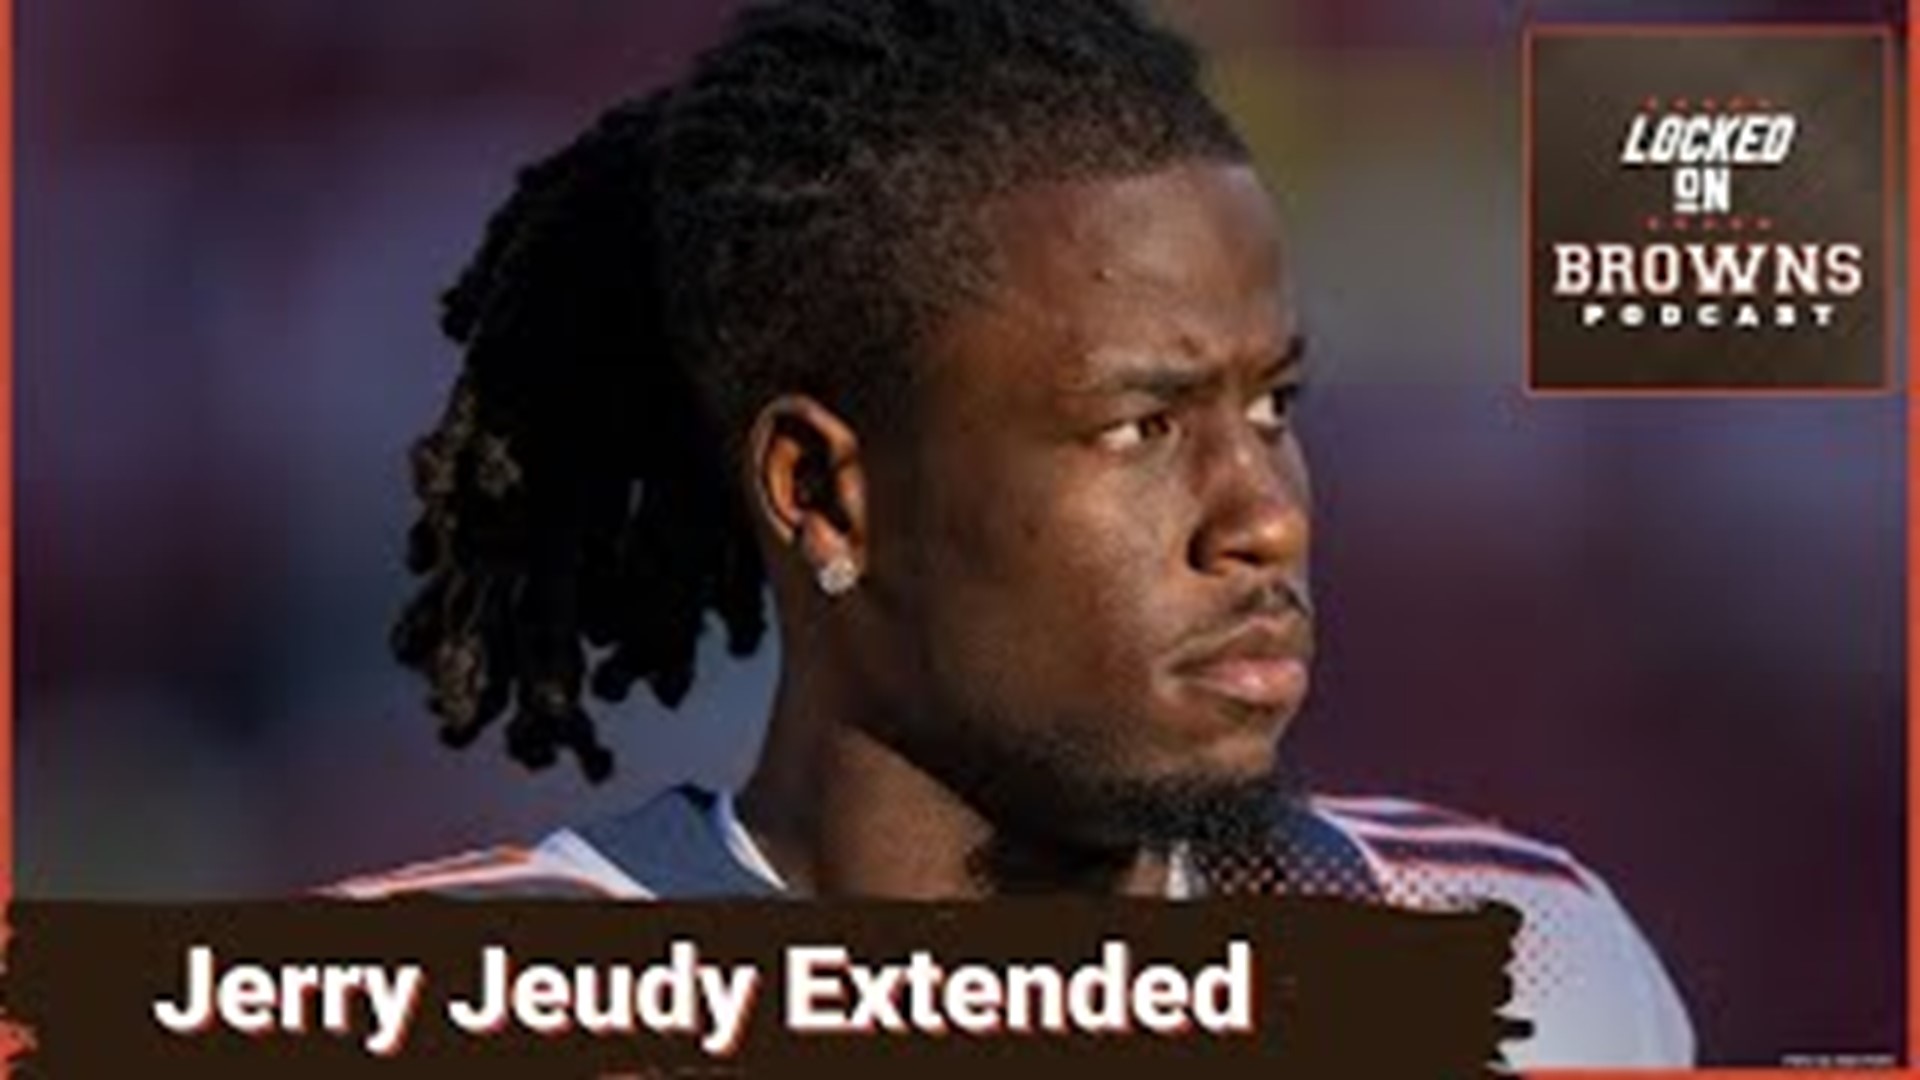 Less than two weeks after trading for wide receiver Jerry Jeudy the Cleveland Browns have extended him through the 2027 season.